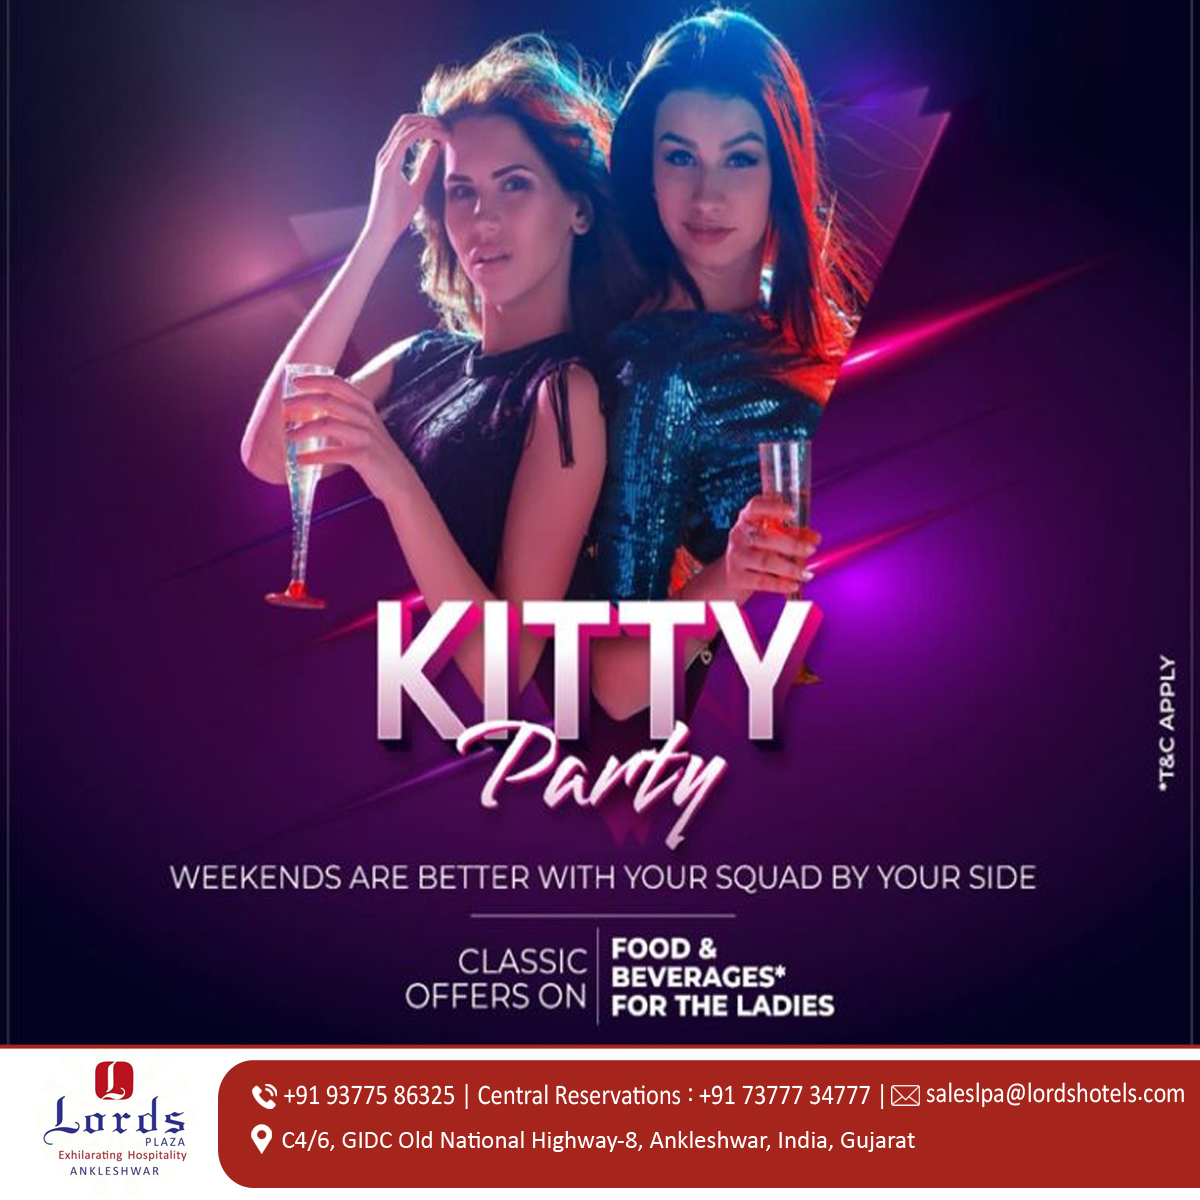 Get ready to witness the most amazing Ladies Kitty Party Ever!!

#kittyparty #kittypartyvenue #kittypartygames #kittypartyindia #KittyPartyFun #KittyPartyMagic #ladiesparties